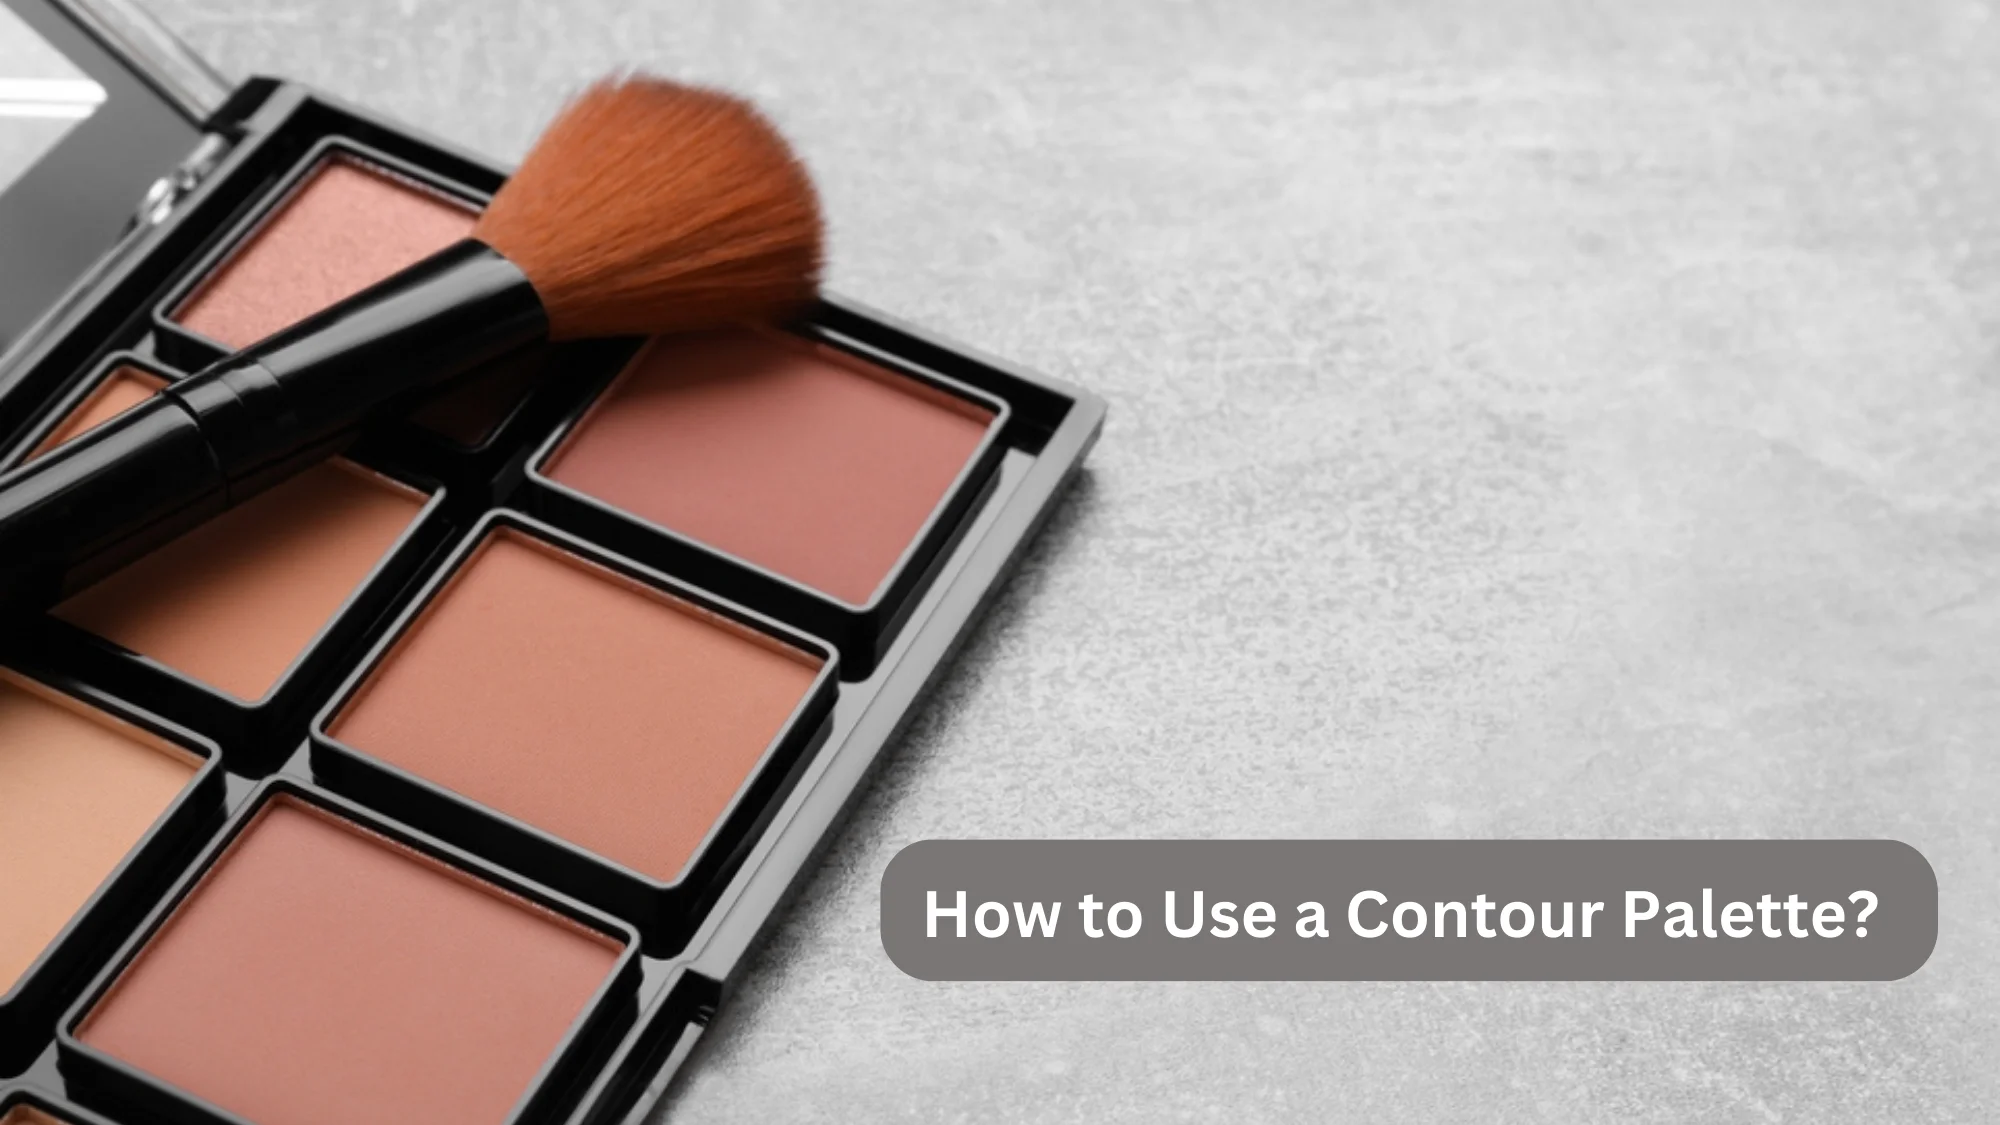 How to Use a Contour Palette?